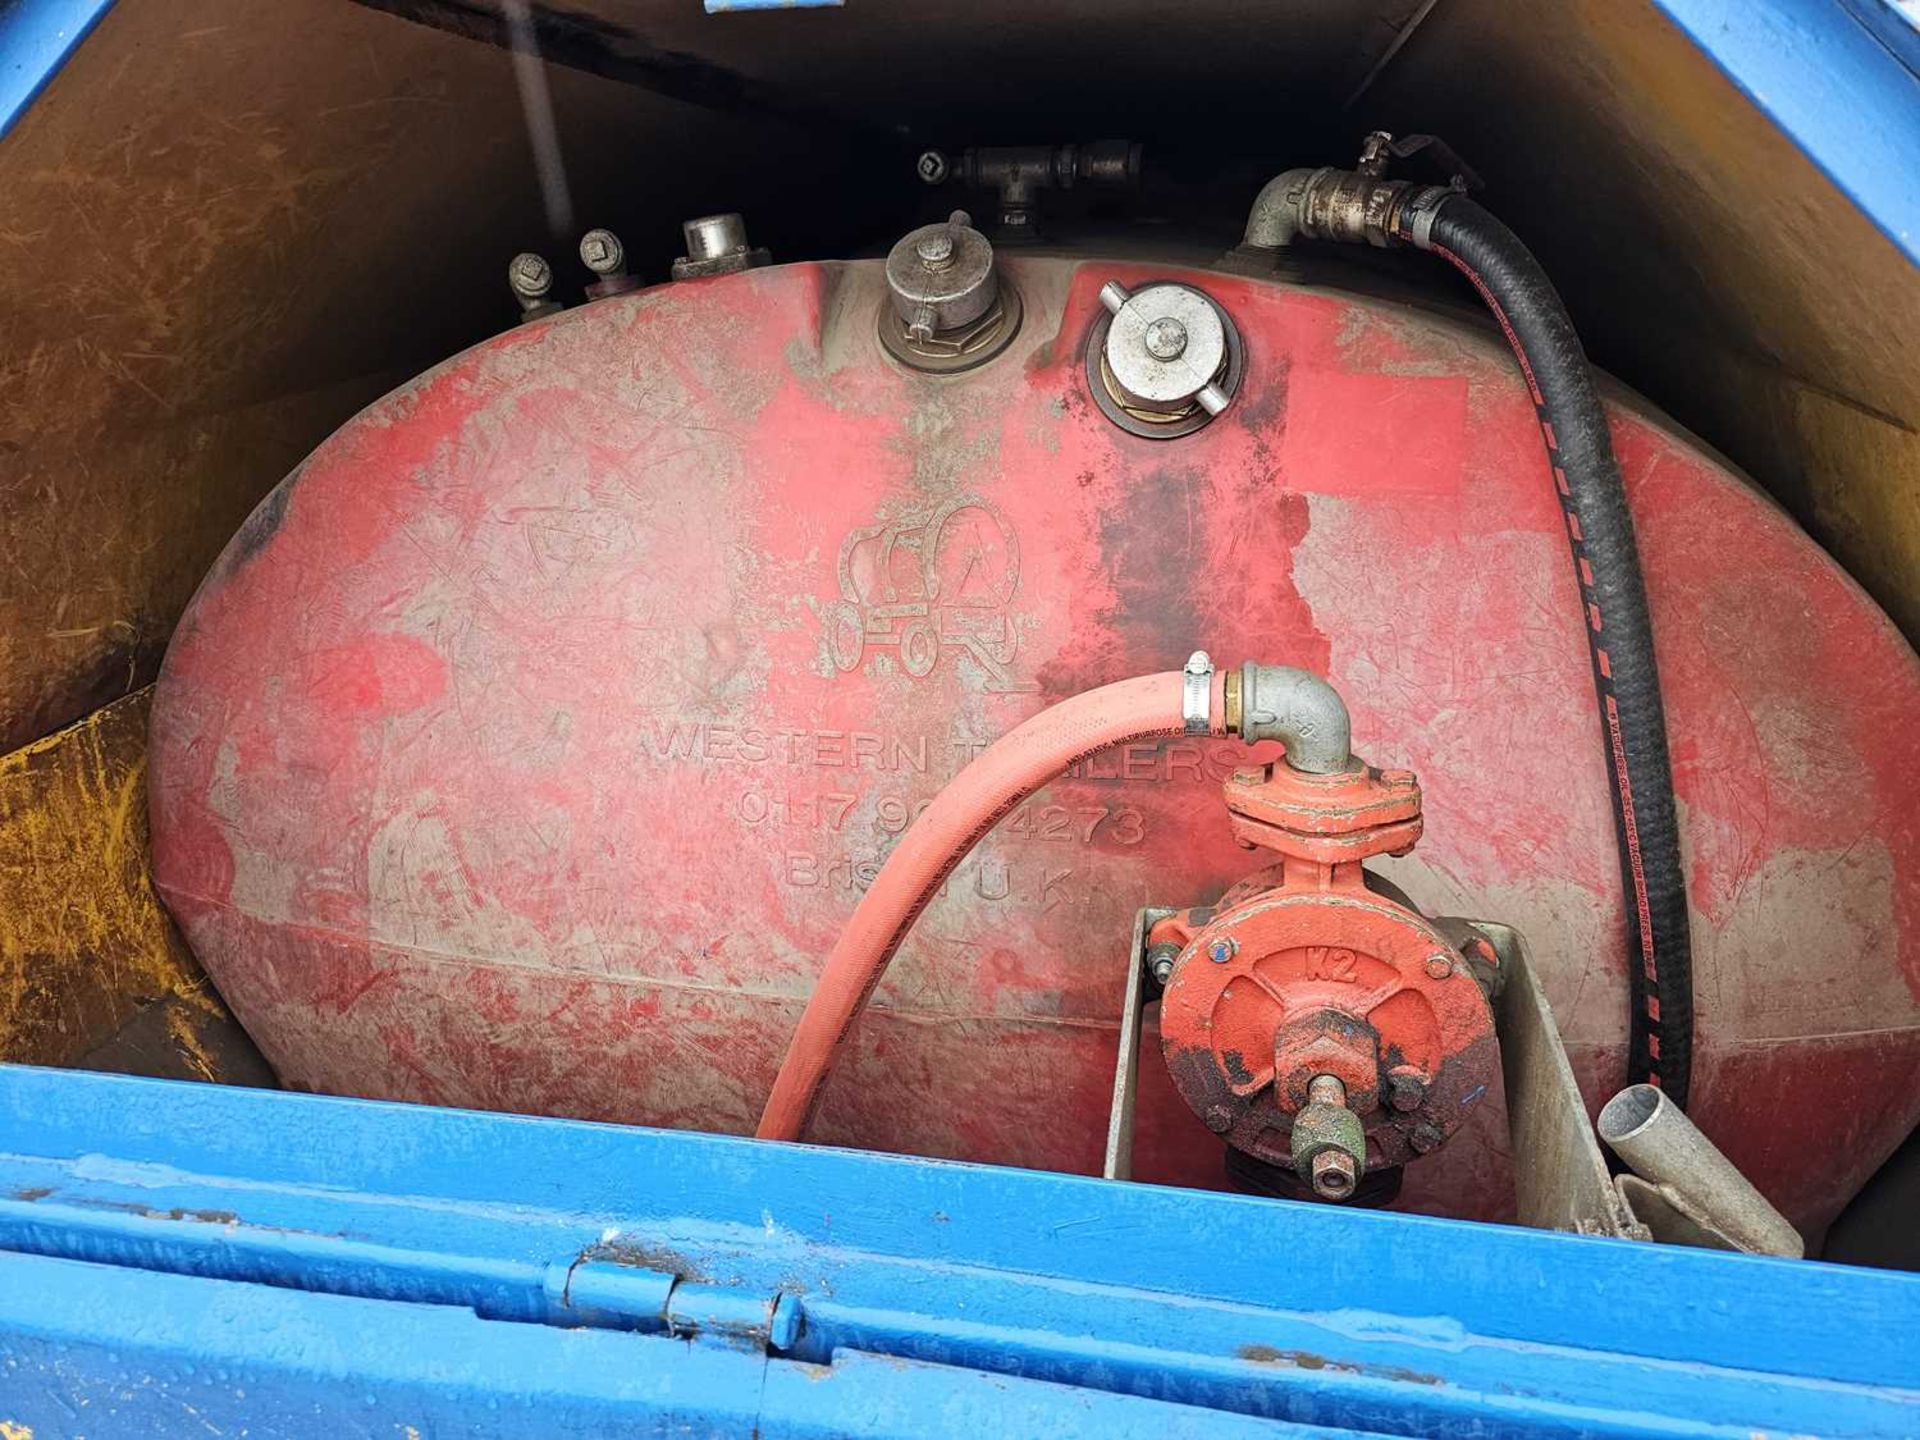 Western 2000 Litre Twin Axle Bunded Fuel Bowser, Manual Pump - Image 7 of 10